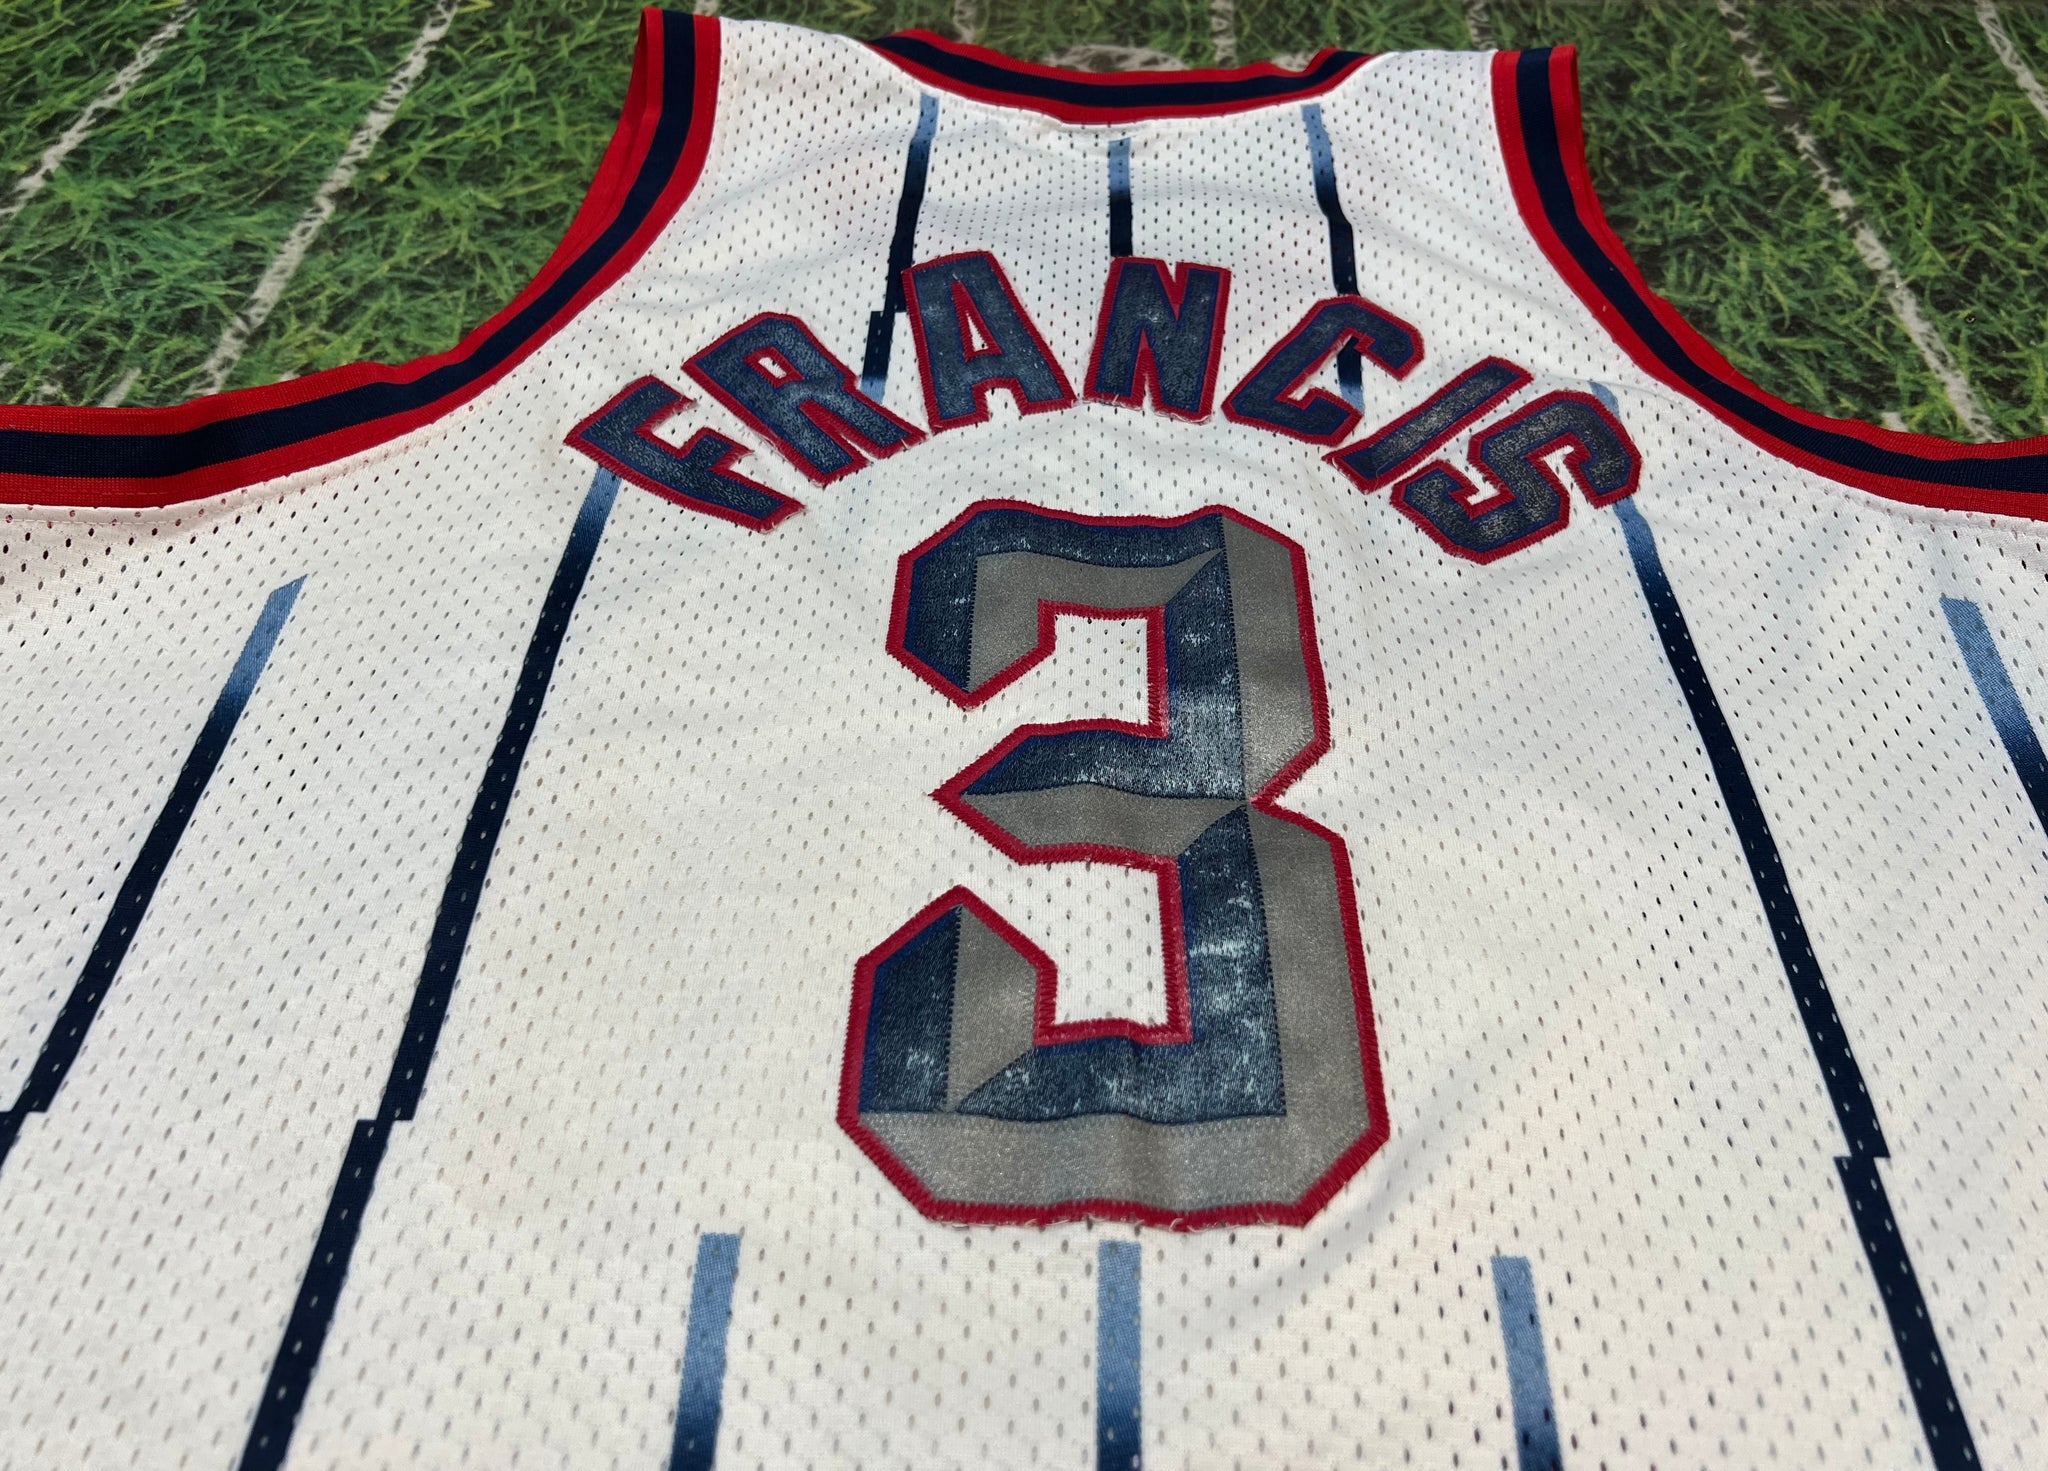 steve francis mitchell and ness